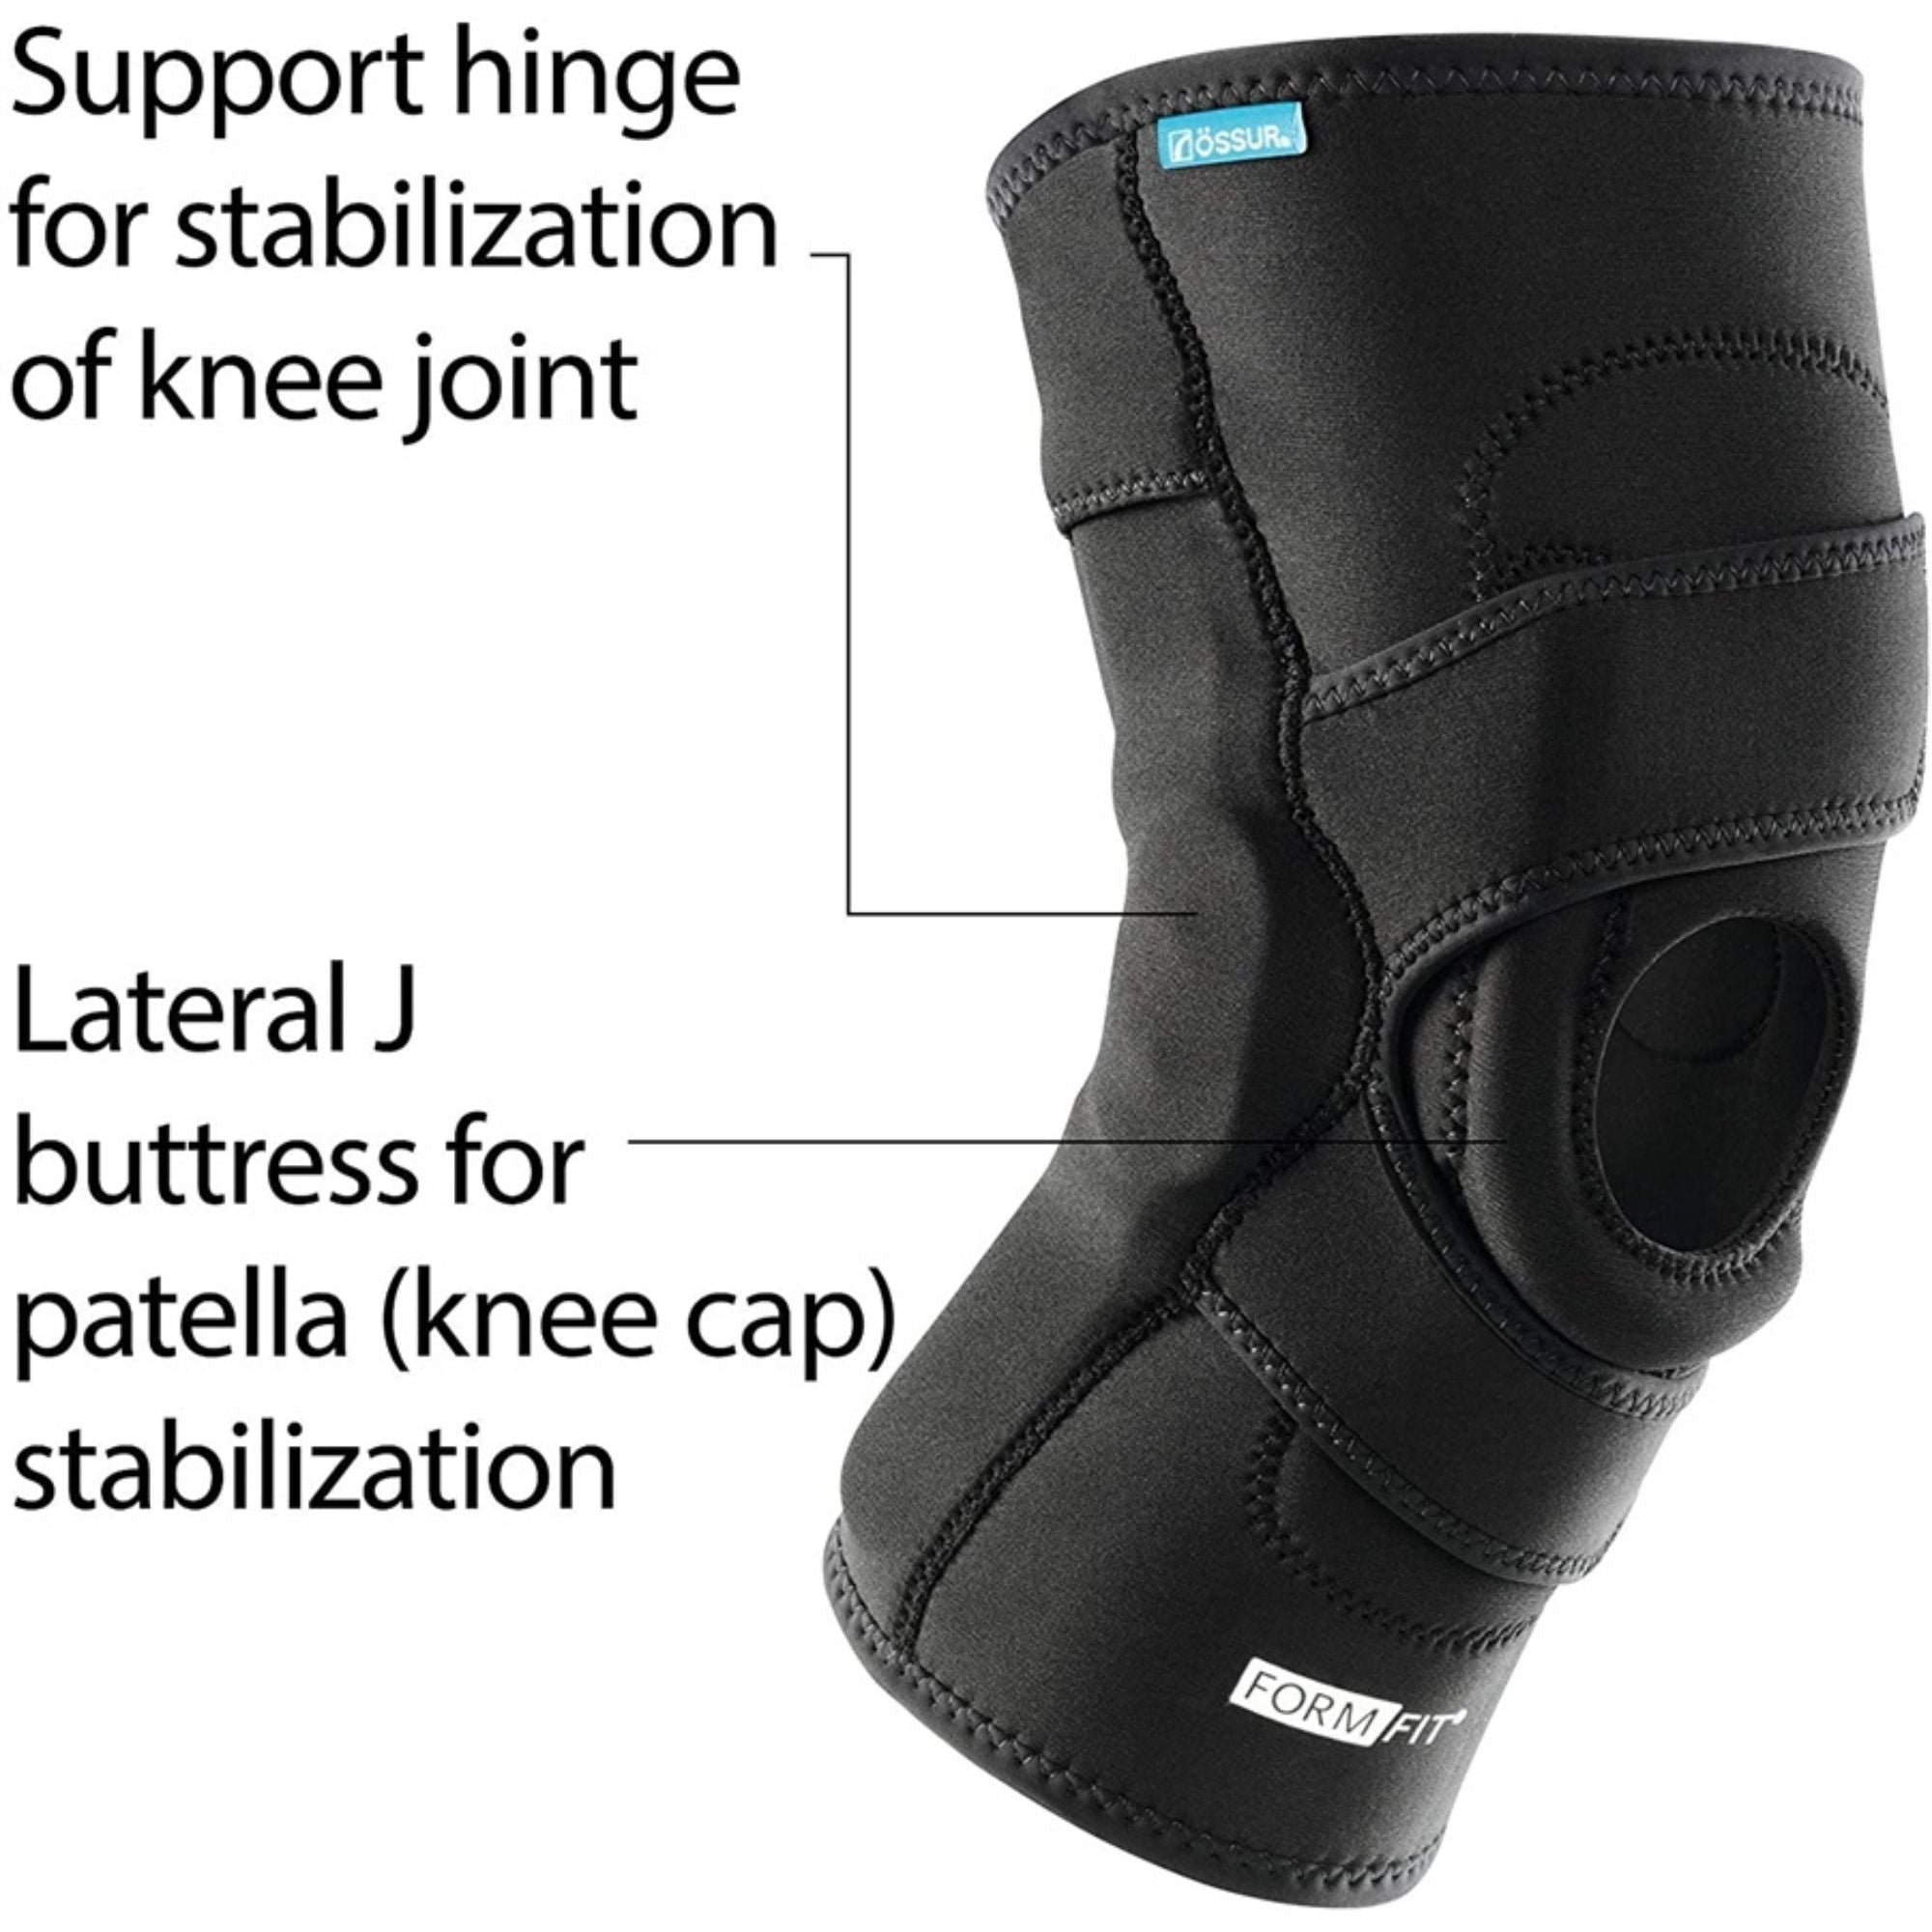 Ossur Formfit Knee Hinged Lateral J